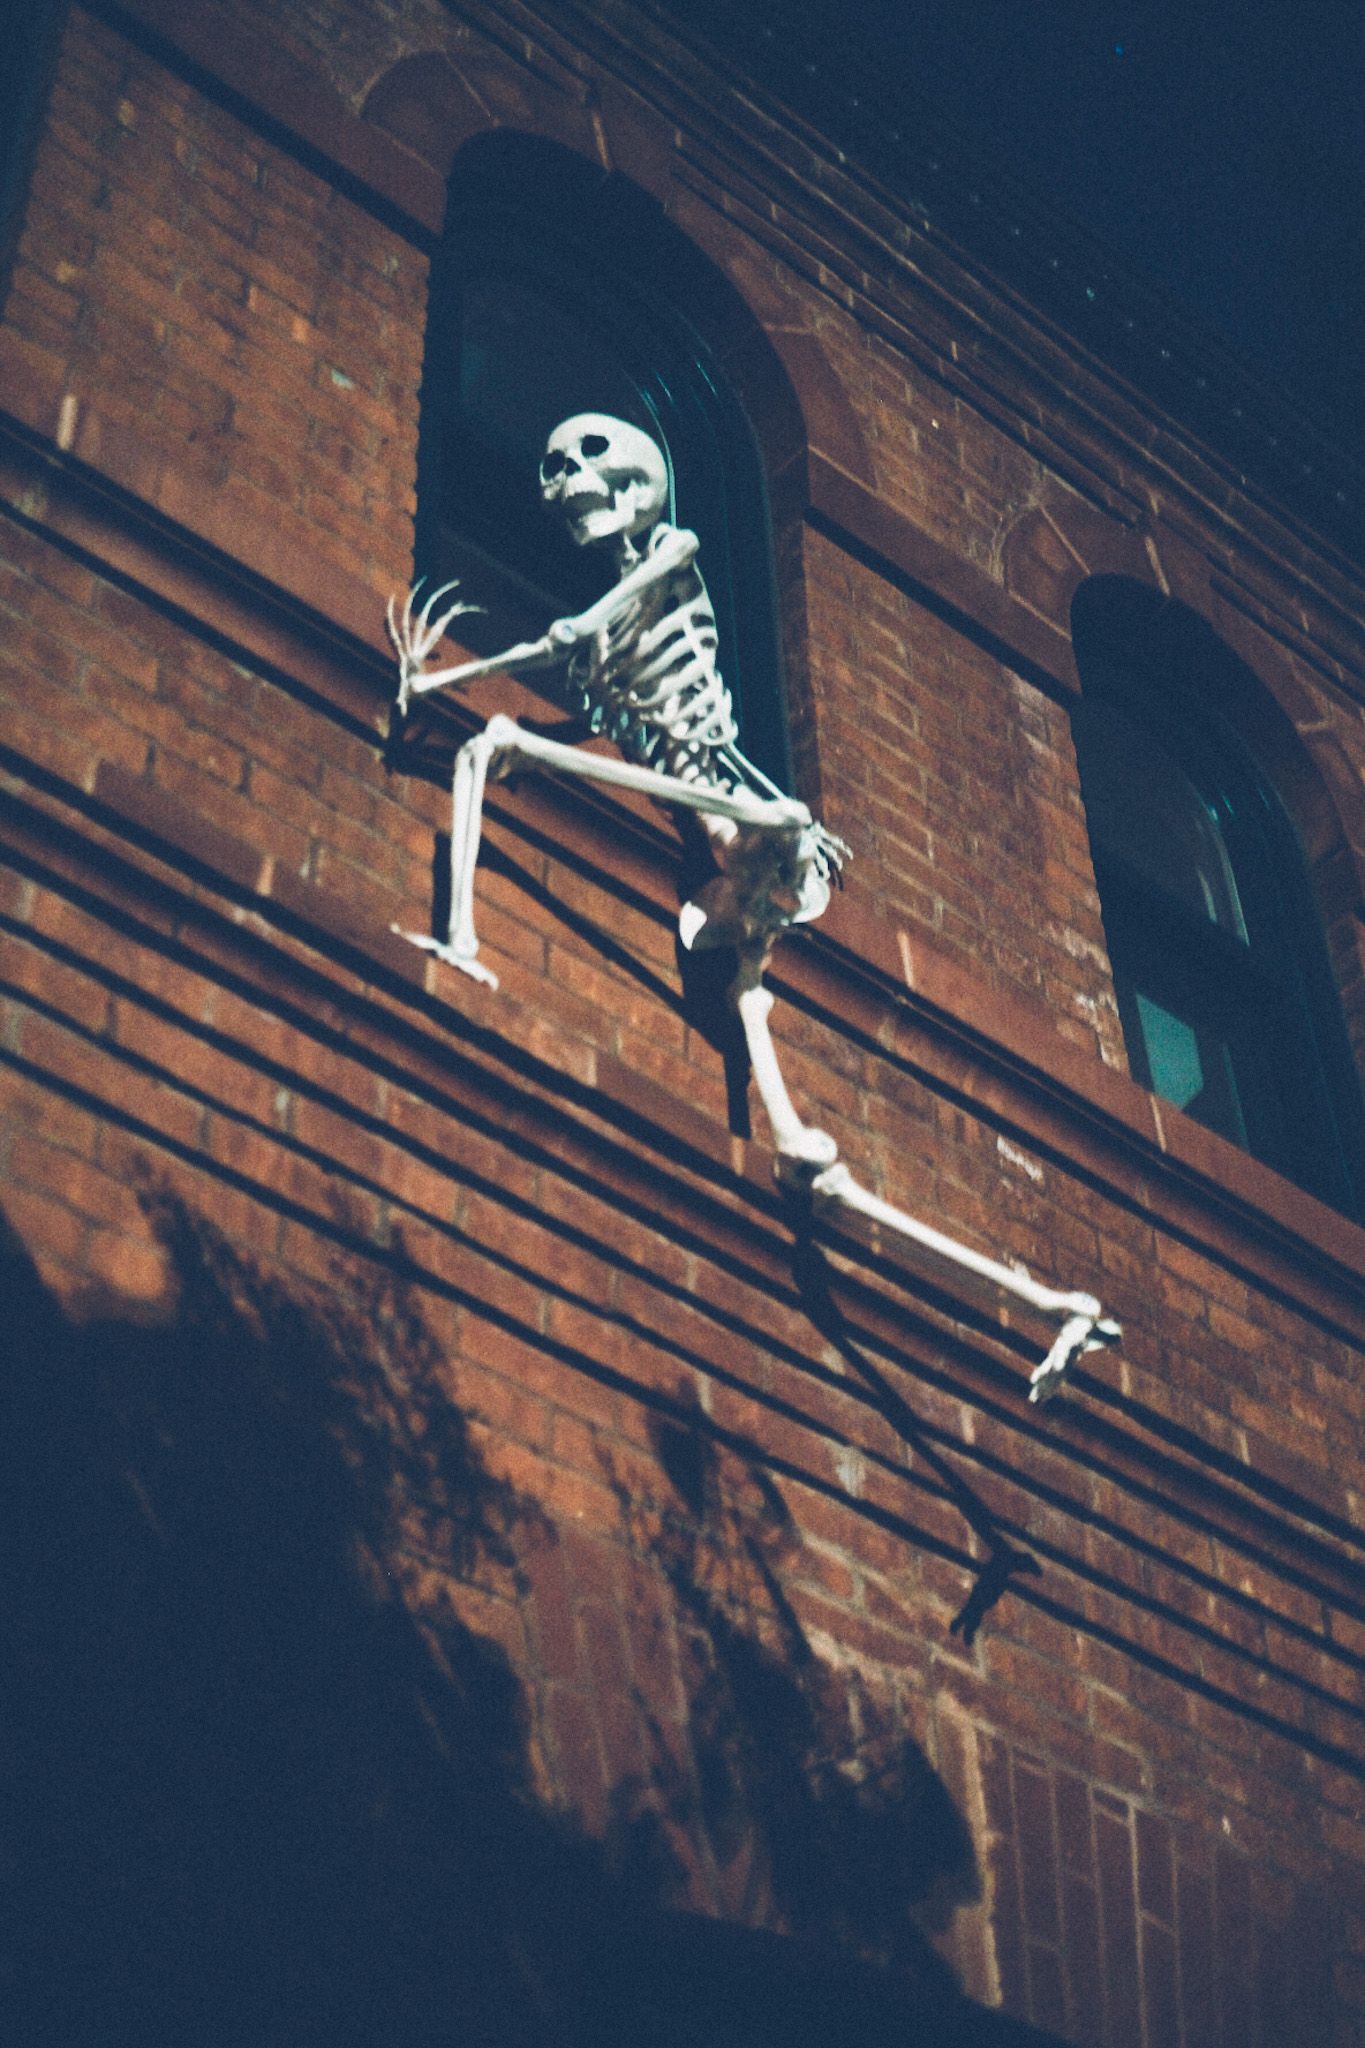 A plastic skeleton hangs from the arched window of a brick building at night, appearing to laugh.